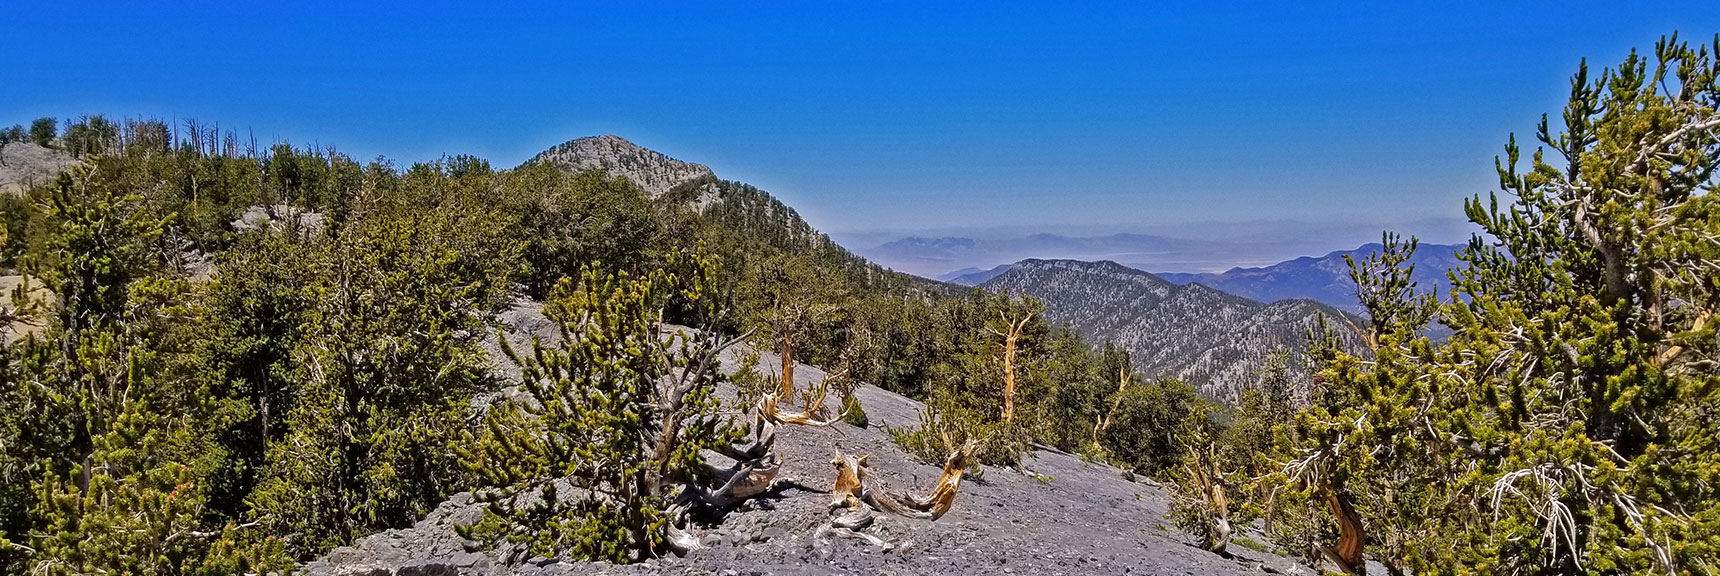 Lee Peak High Point Ahead. Beginning of Descent Ridge to Lee Canyon is Lower Hill to Right. | Lee to Kyle Canyon | Foxtail Approach | Mt Charleston Wilderness | Spring Mountains, Nevada